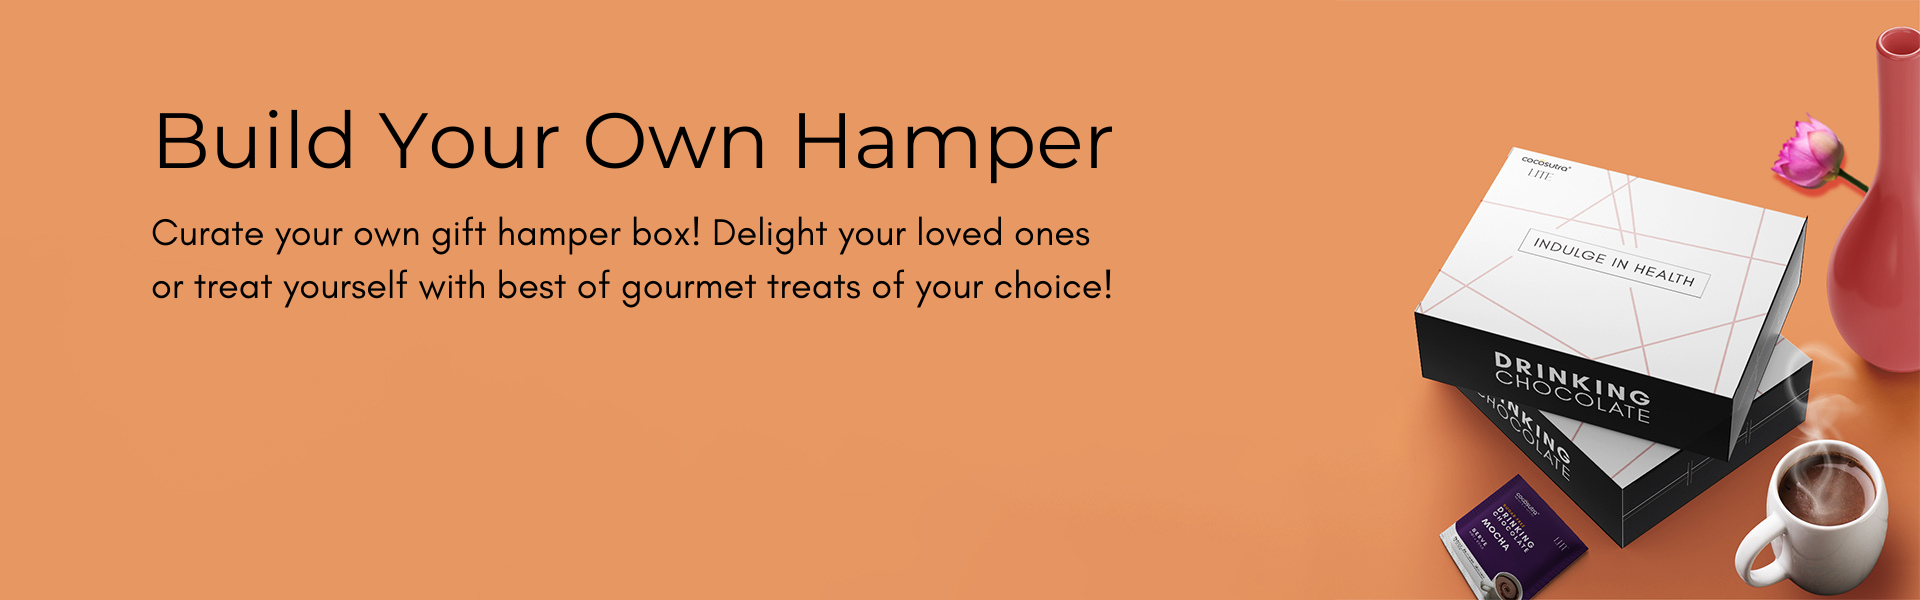 Cocosutra - Build your own hamper